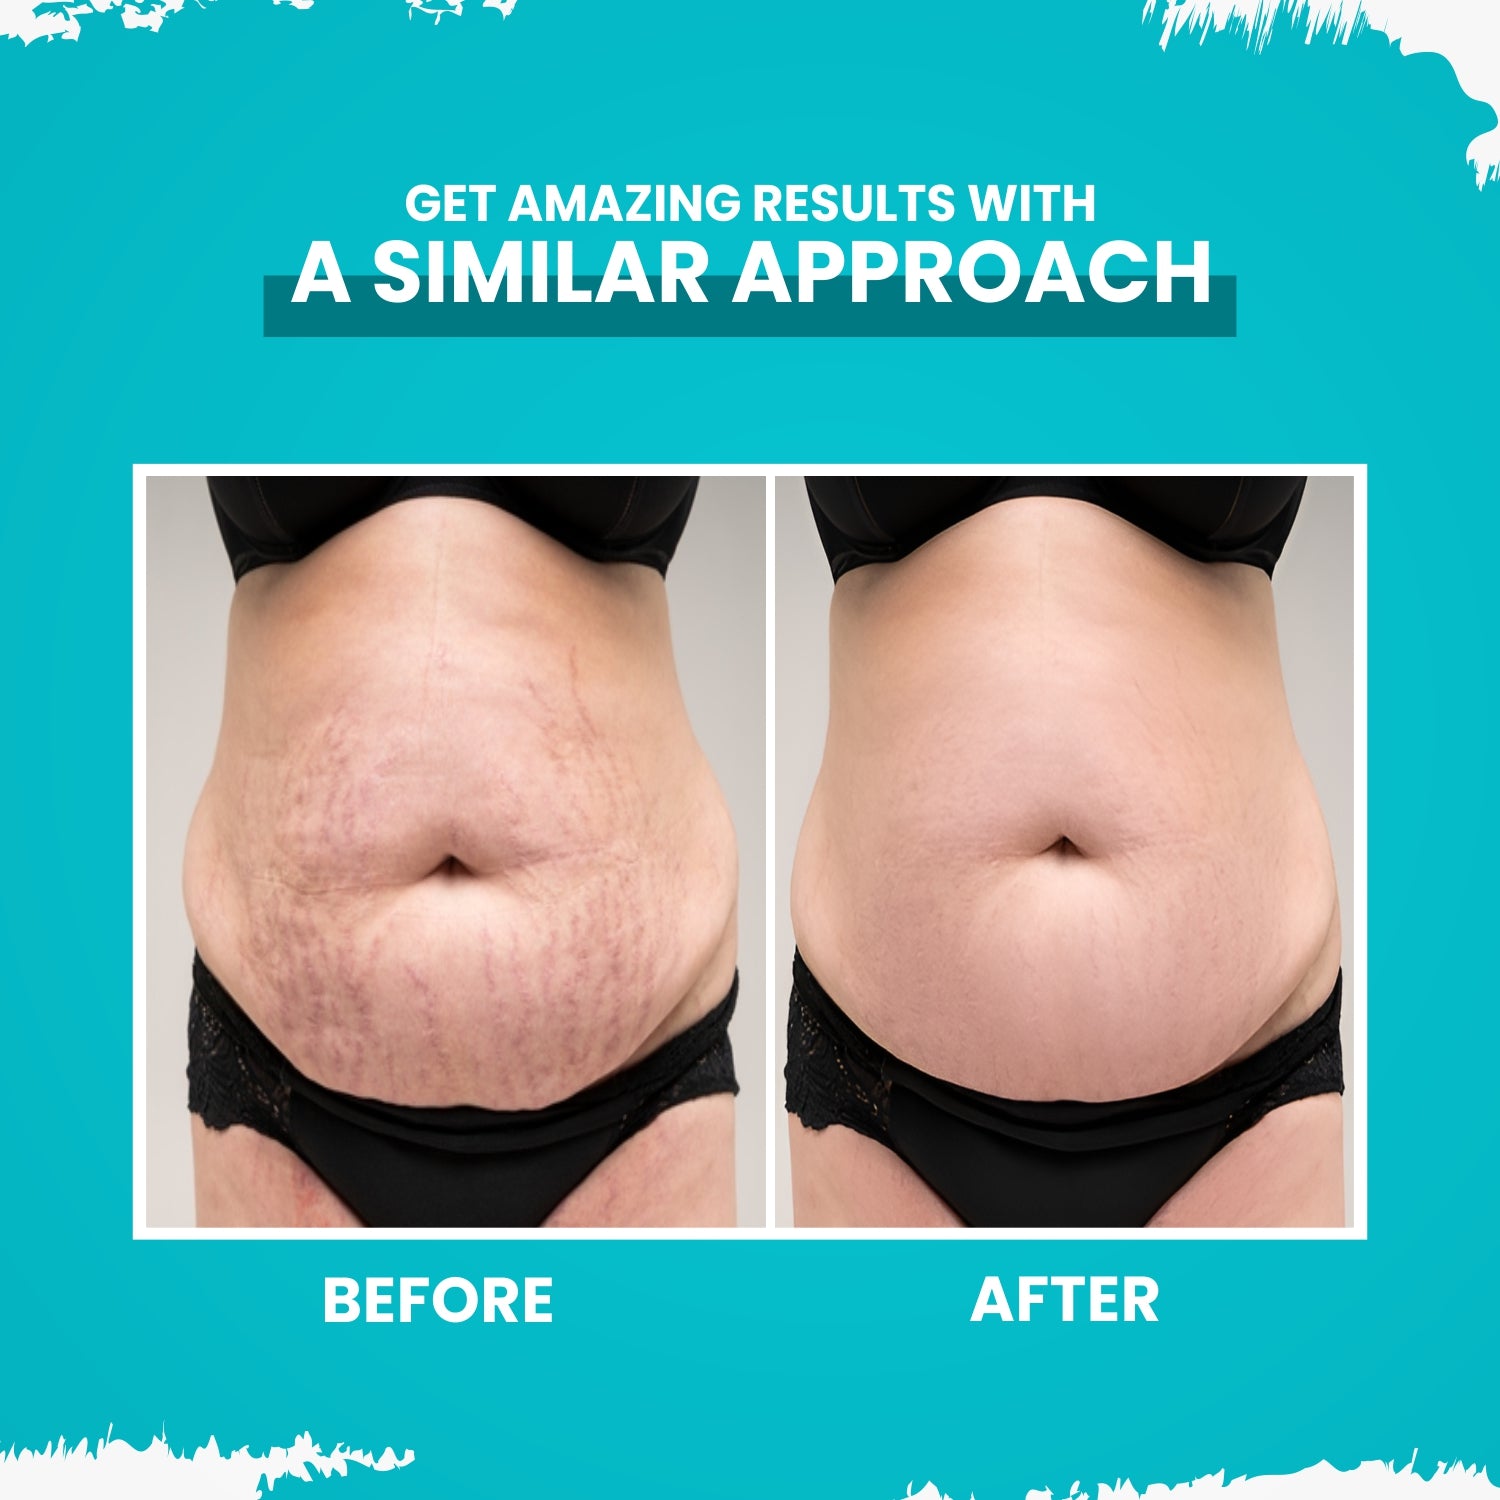 Flawless Skin Ahead: Stretch Mark Removal Cream for All Skin Types (50g)